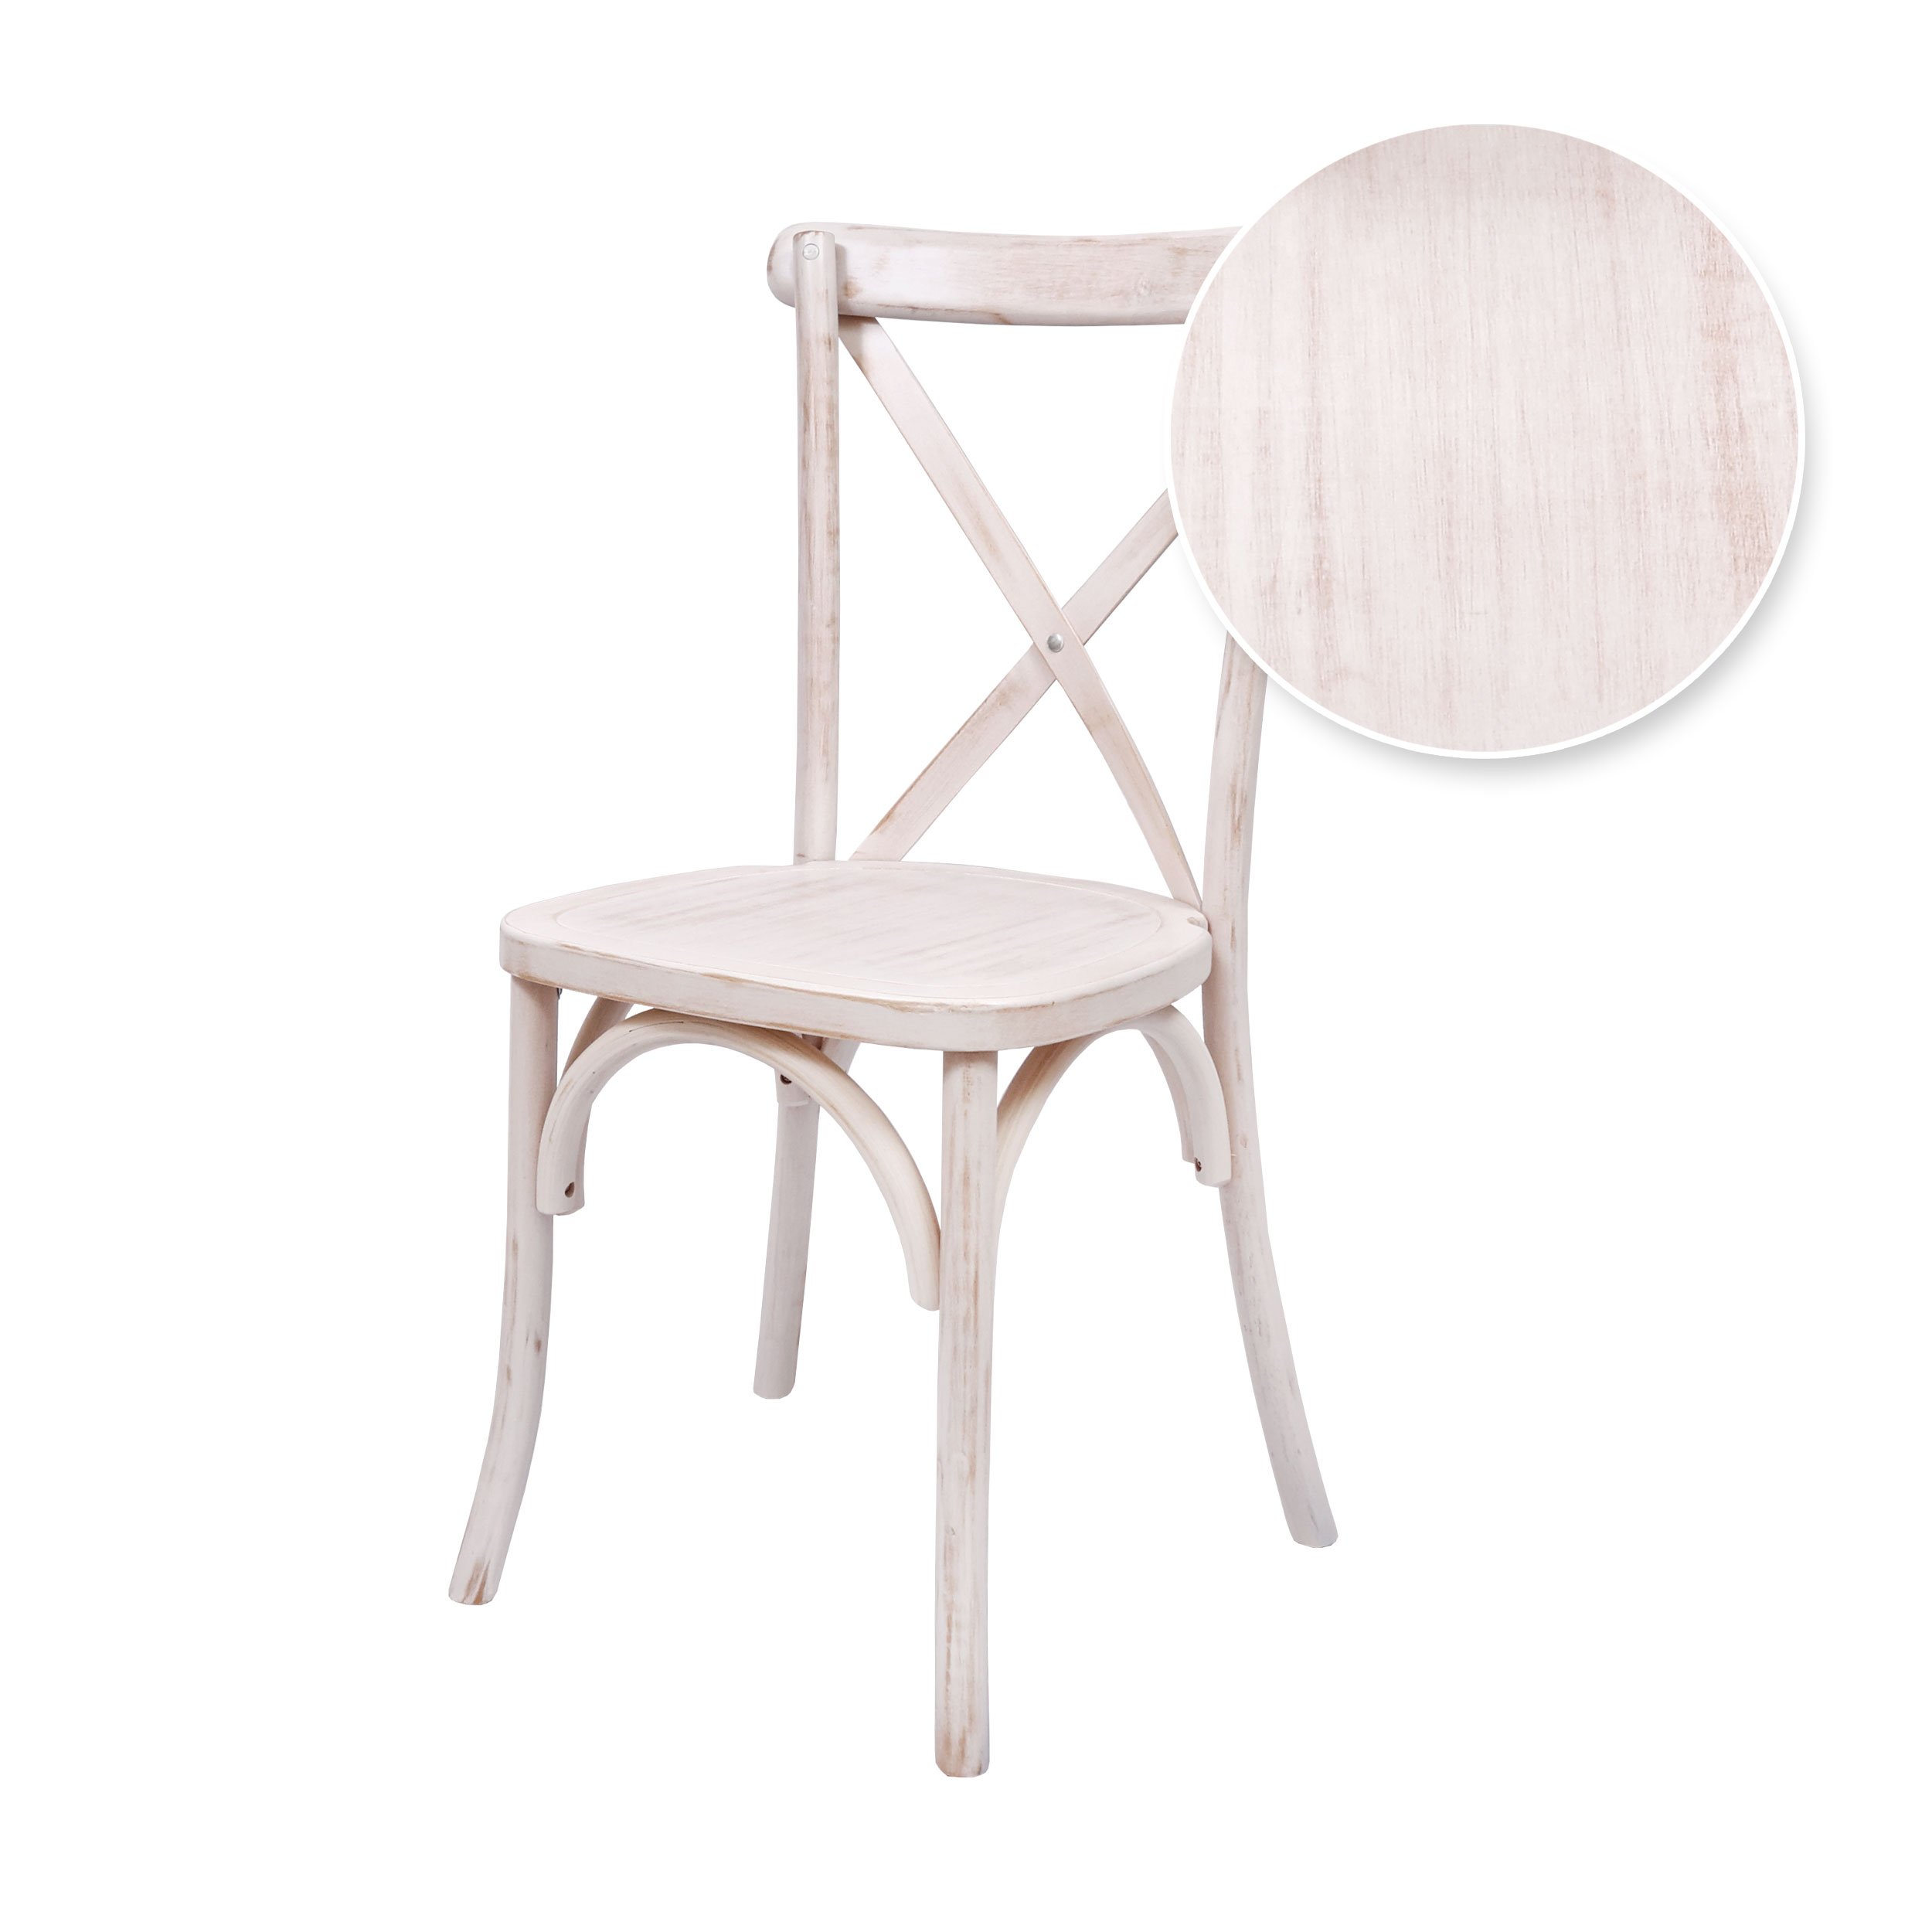 Chair Wood Crossback White Distressed CXWWD ZG T Front View with Color Swatch